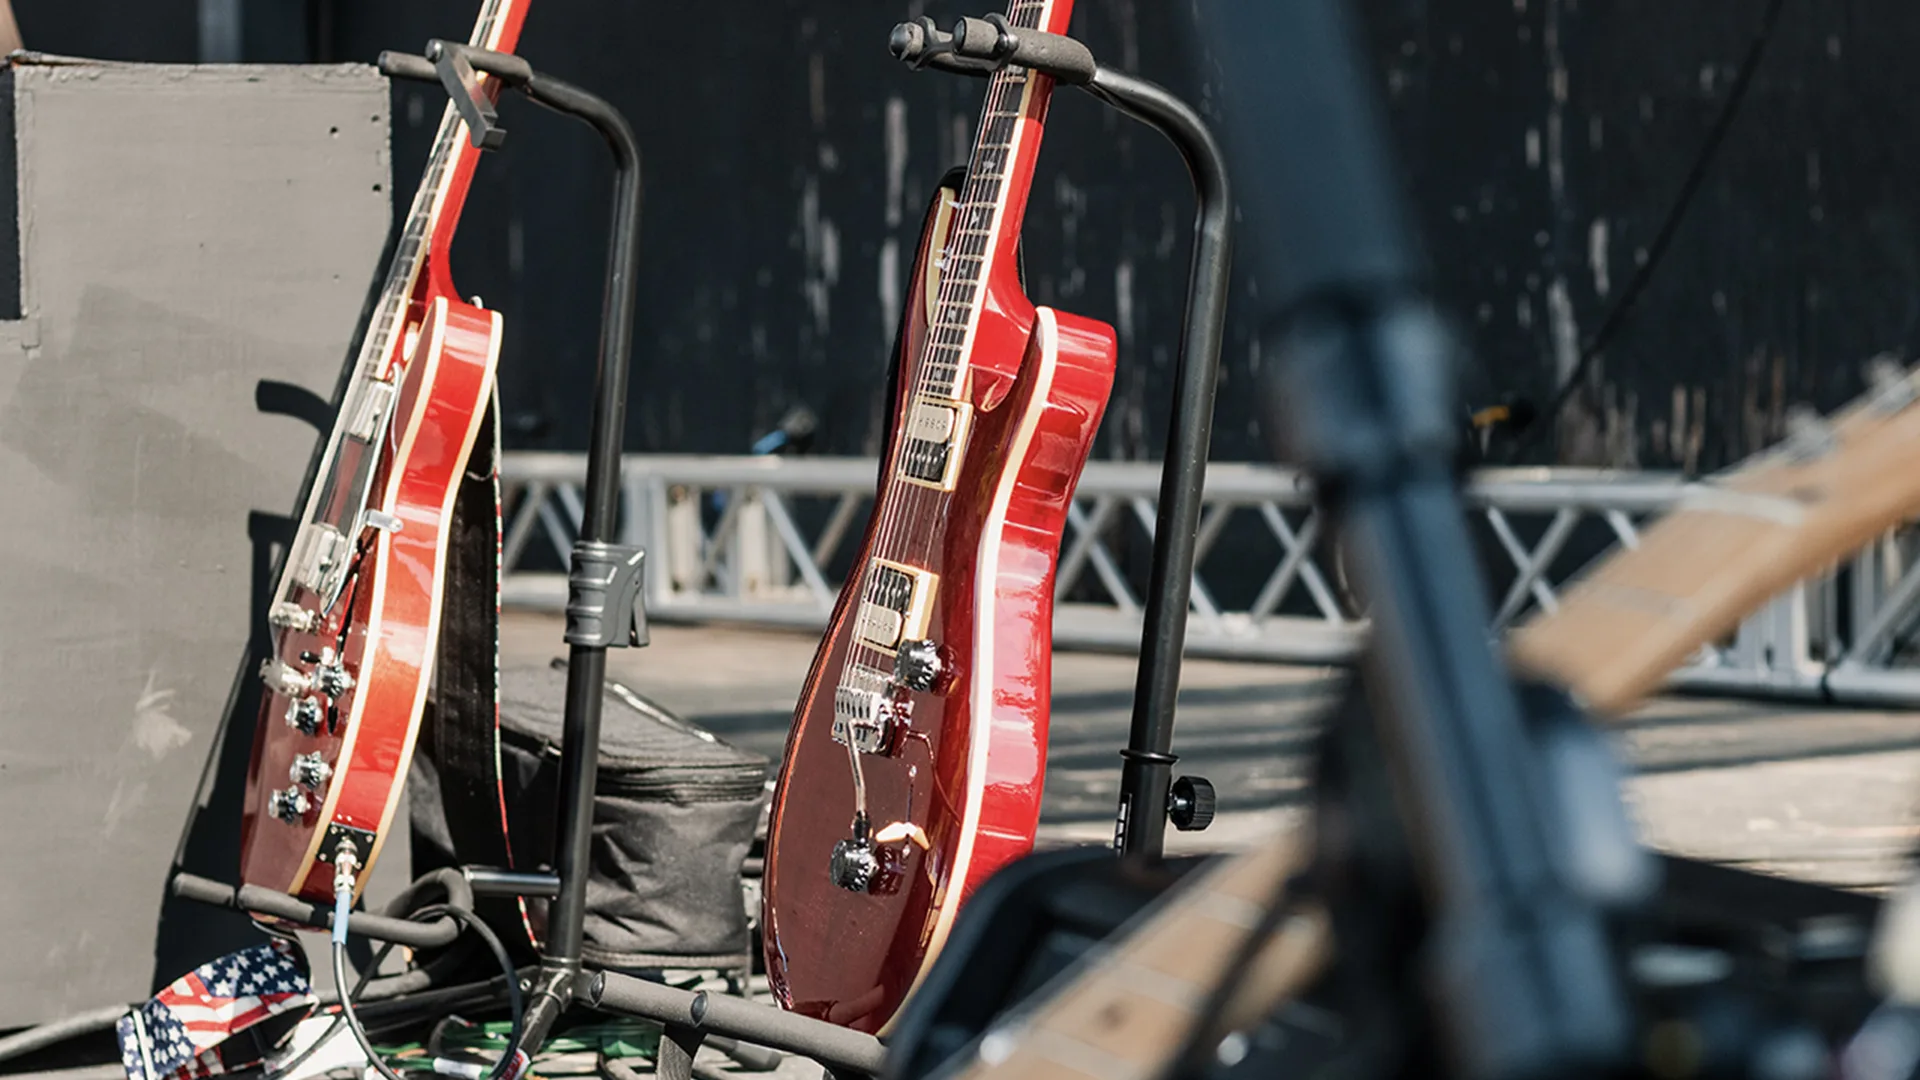 Guitars on stands on stage